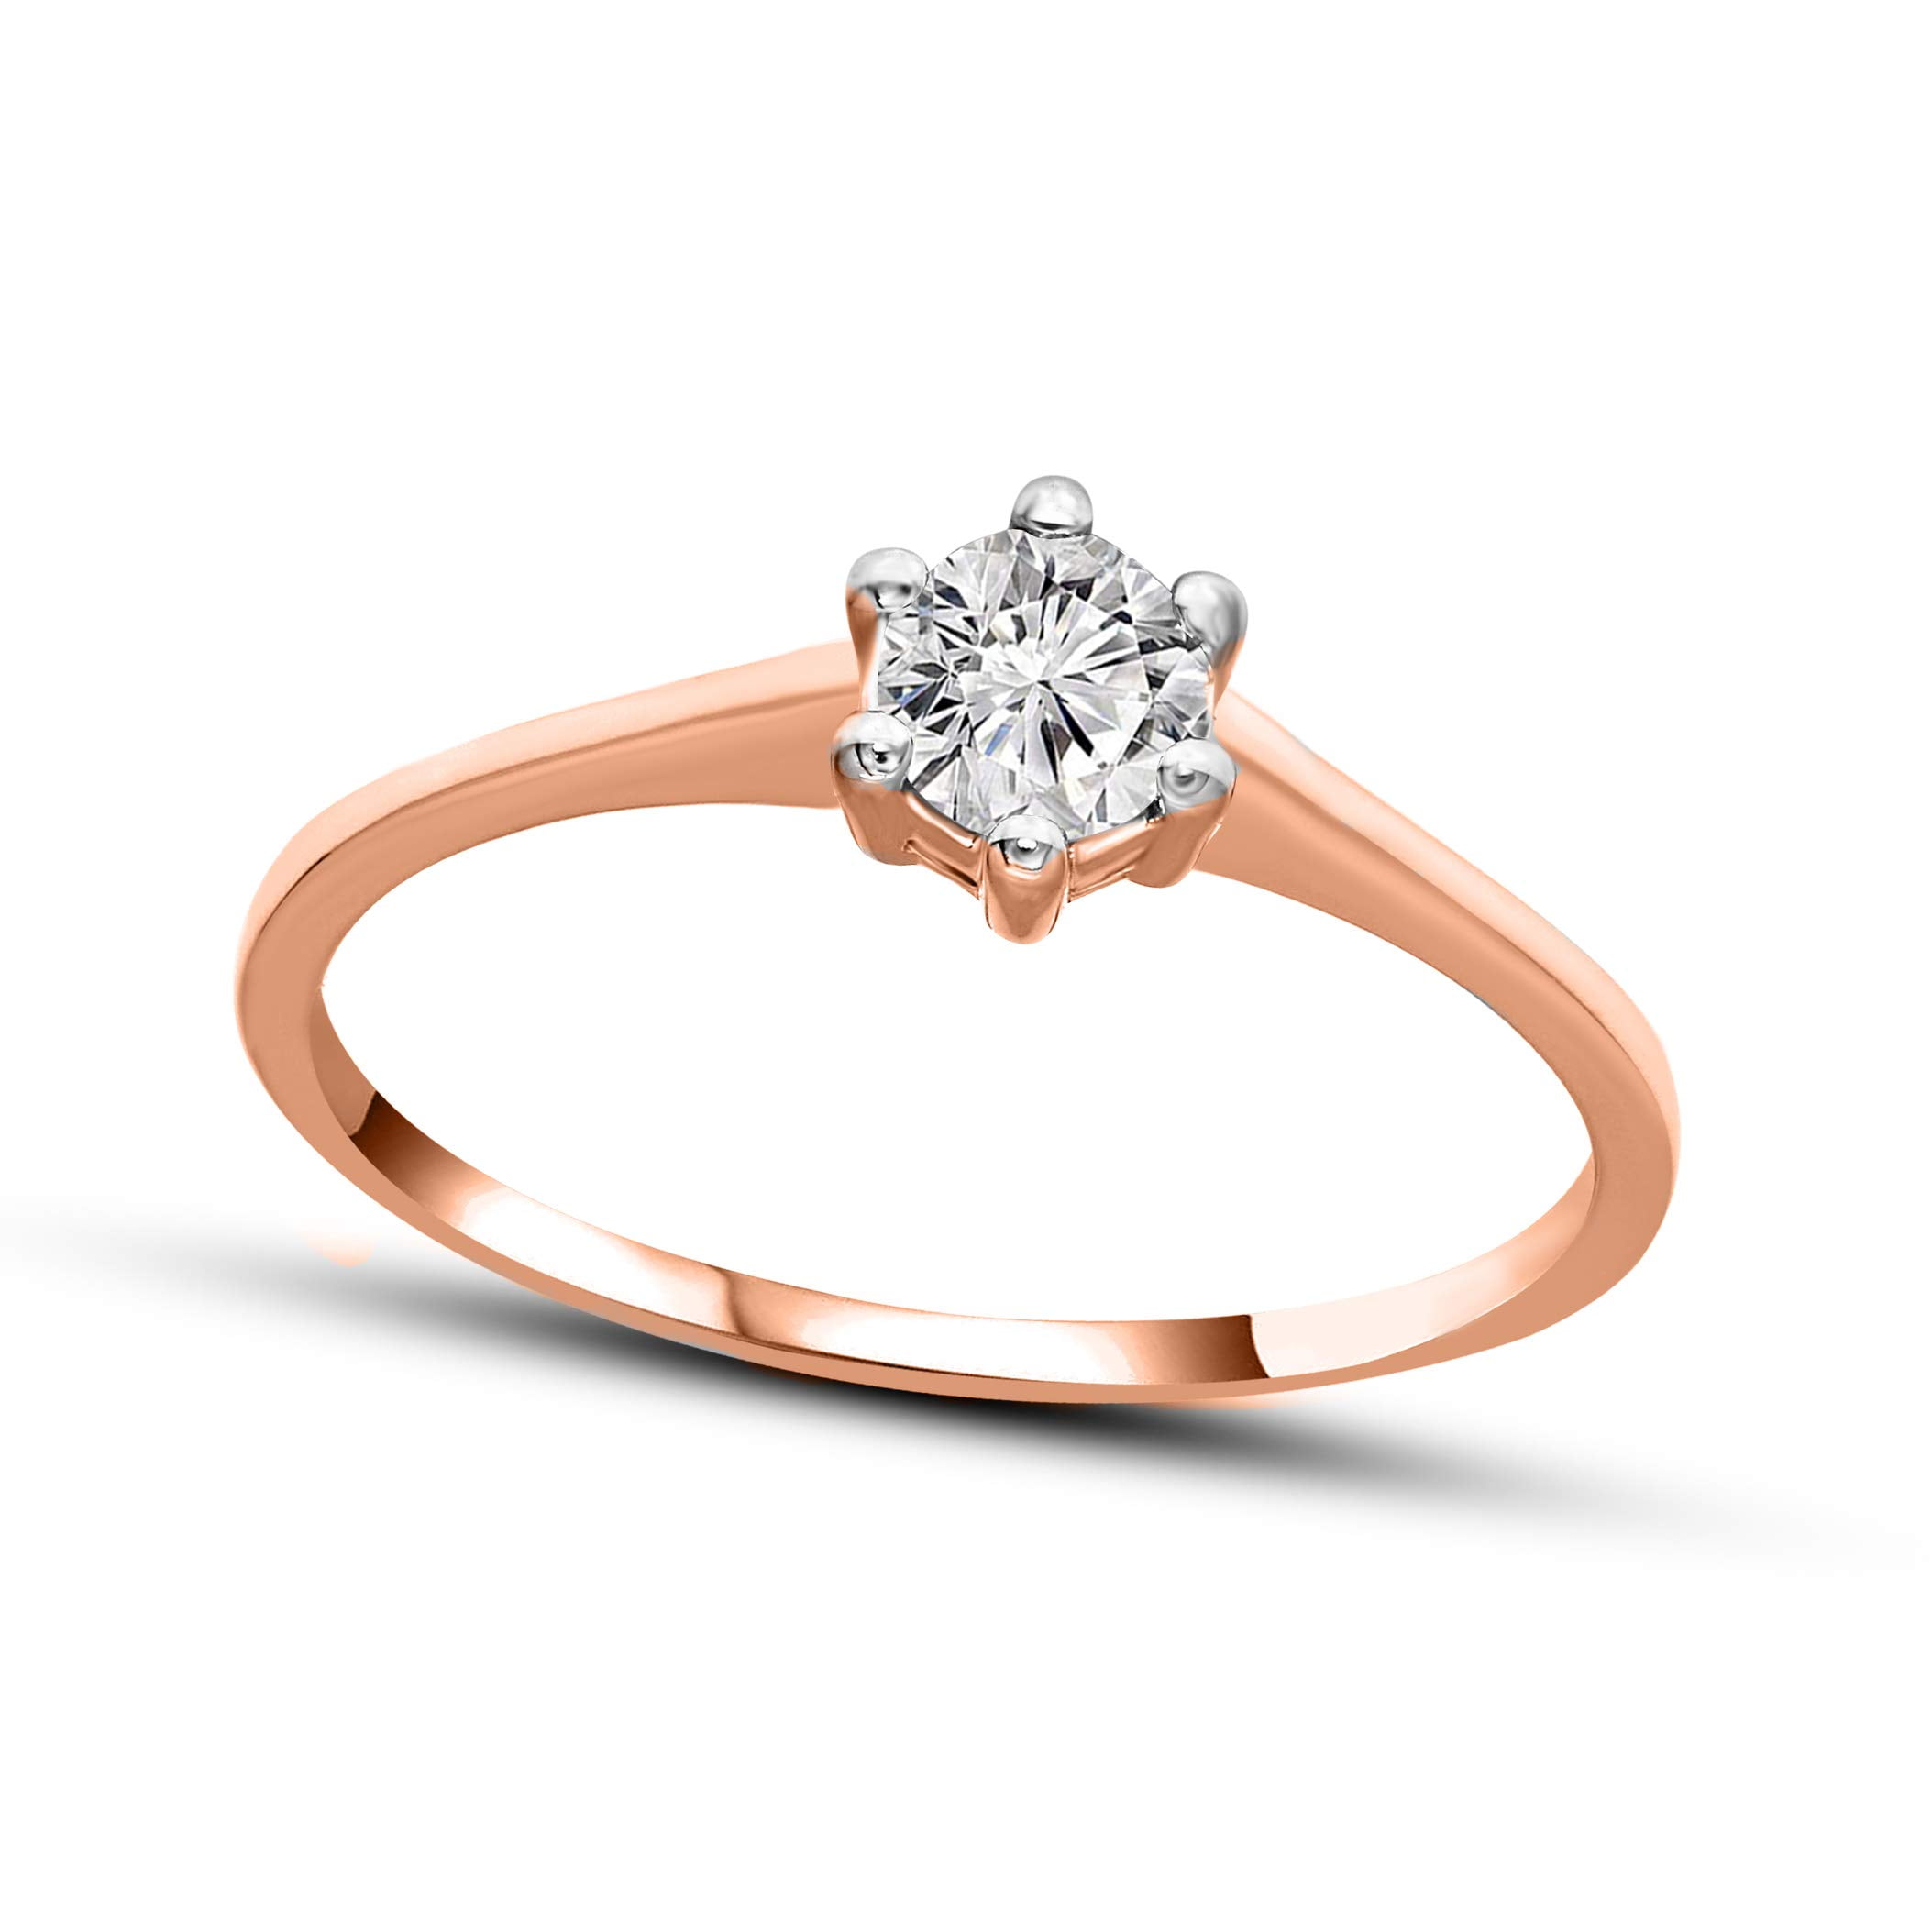 Tanache - IGI Certified Natural Diamond Ring 14K Rose Gold 1/2 carat 100%  Real Diamond 6 Prong Solitaire Ring For Women (1/2 CTTW, GH Color, I2 